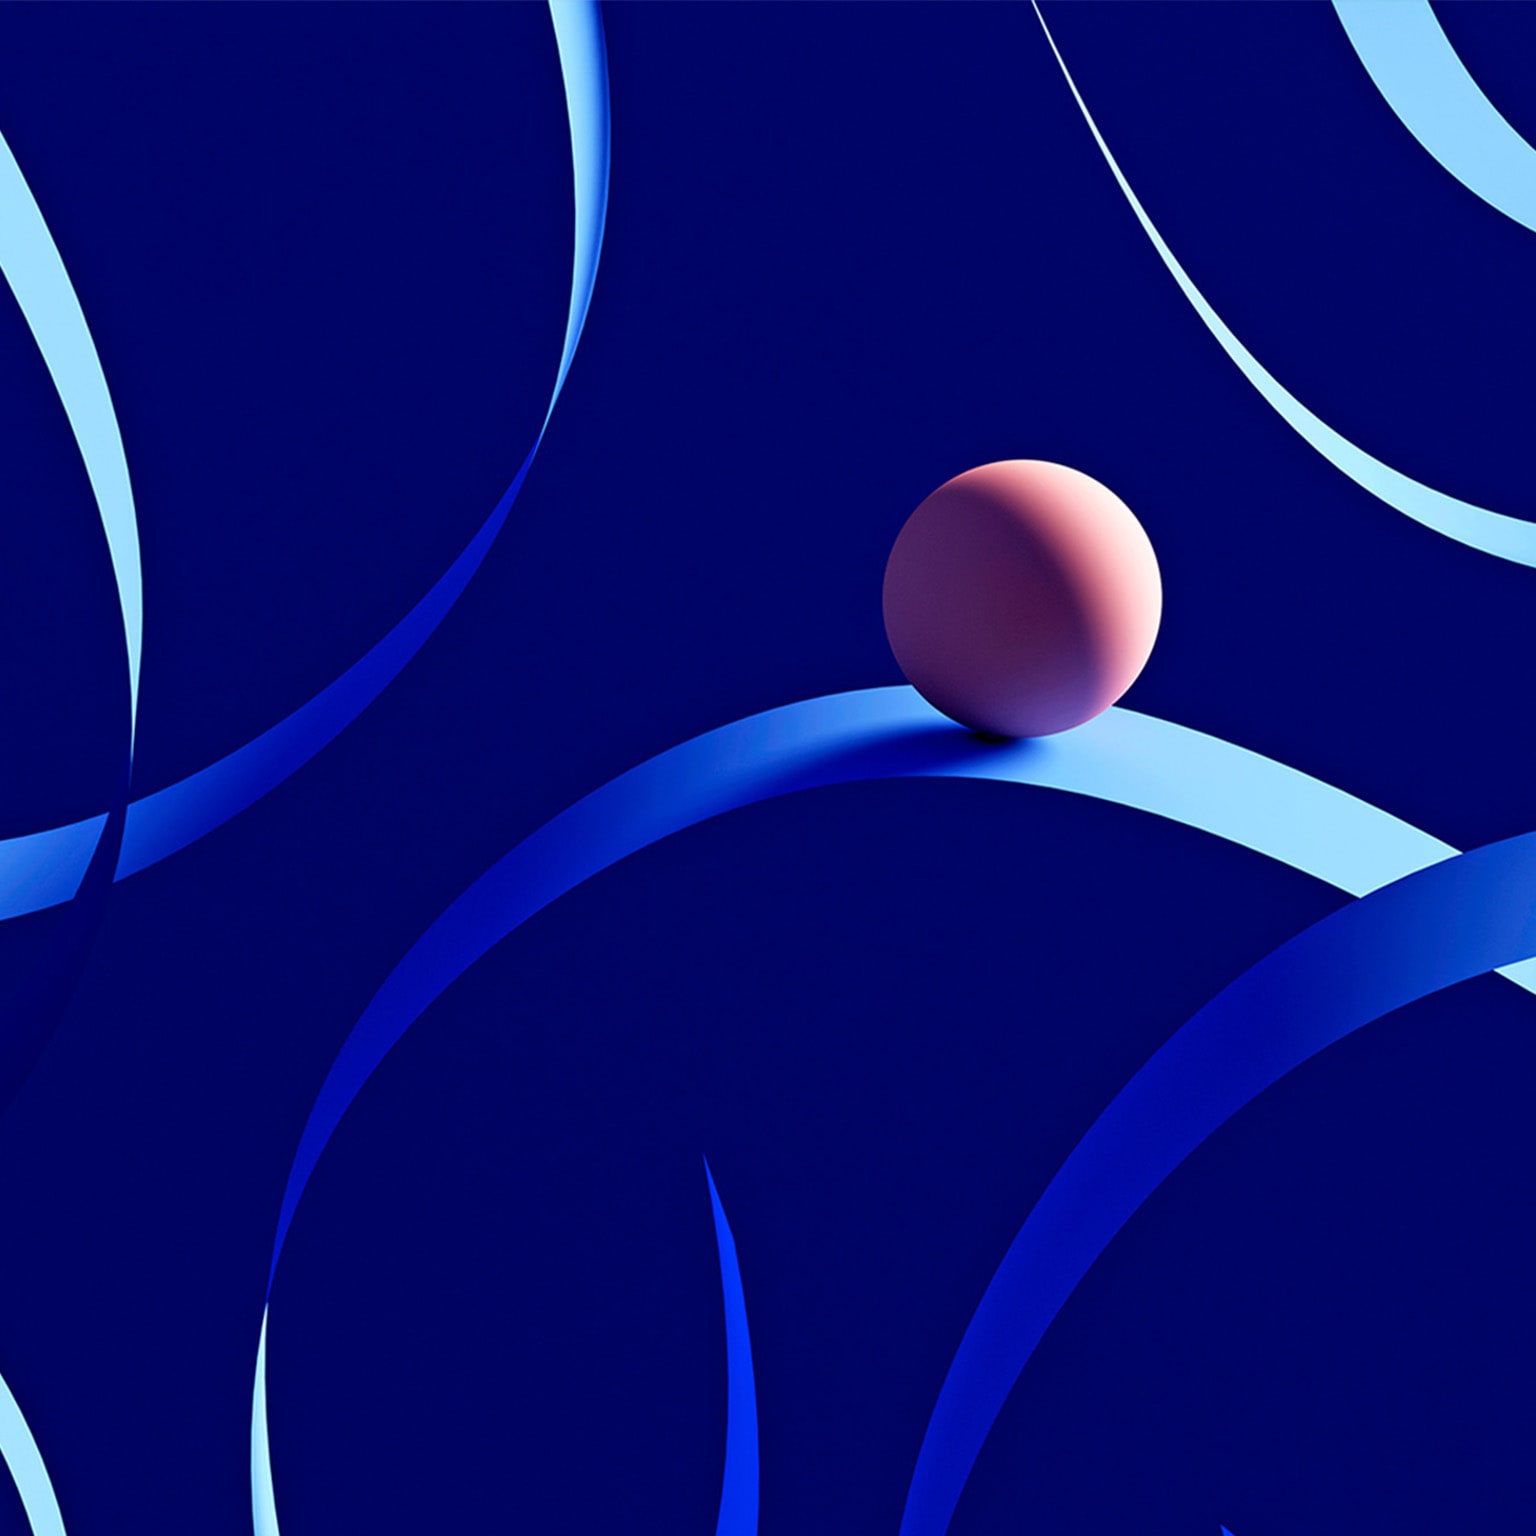 Illustration of a small red ball on blue strings